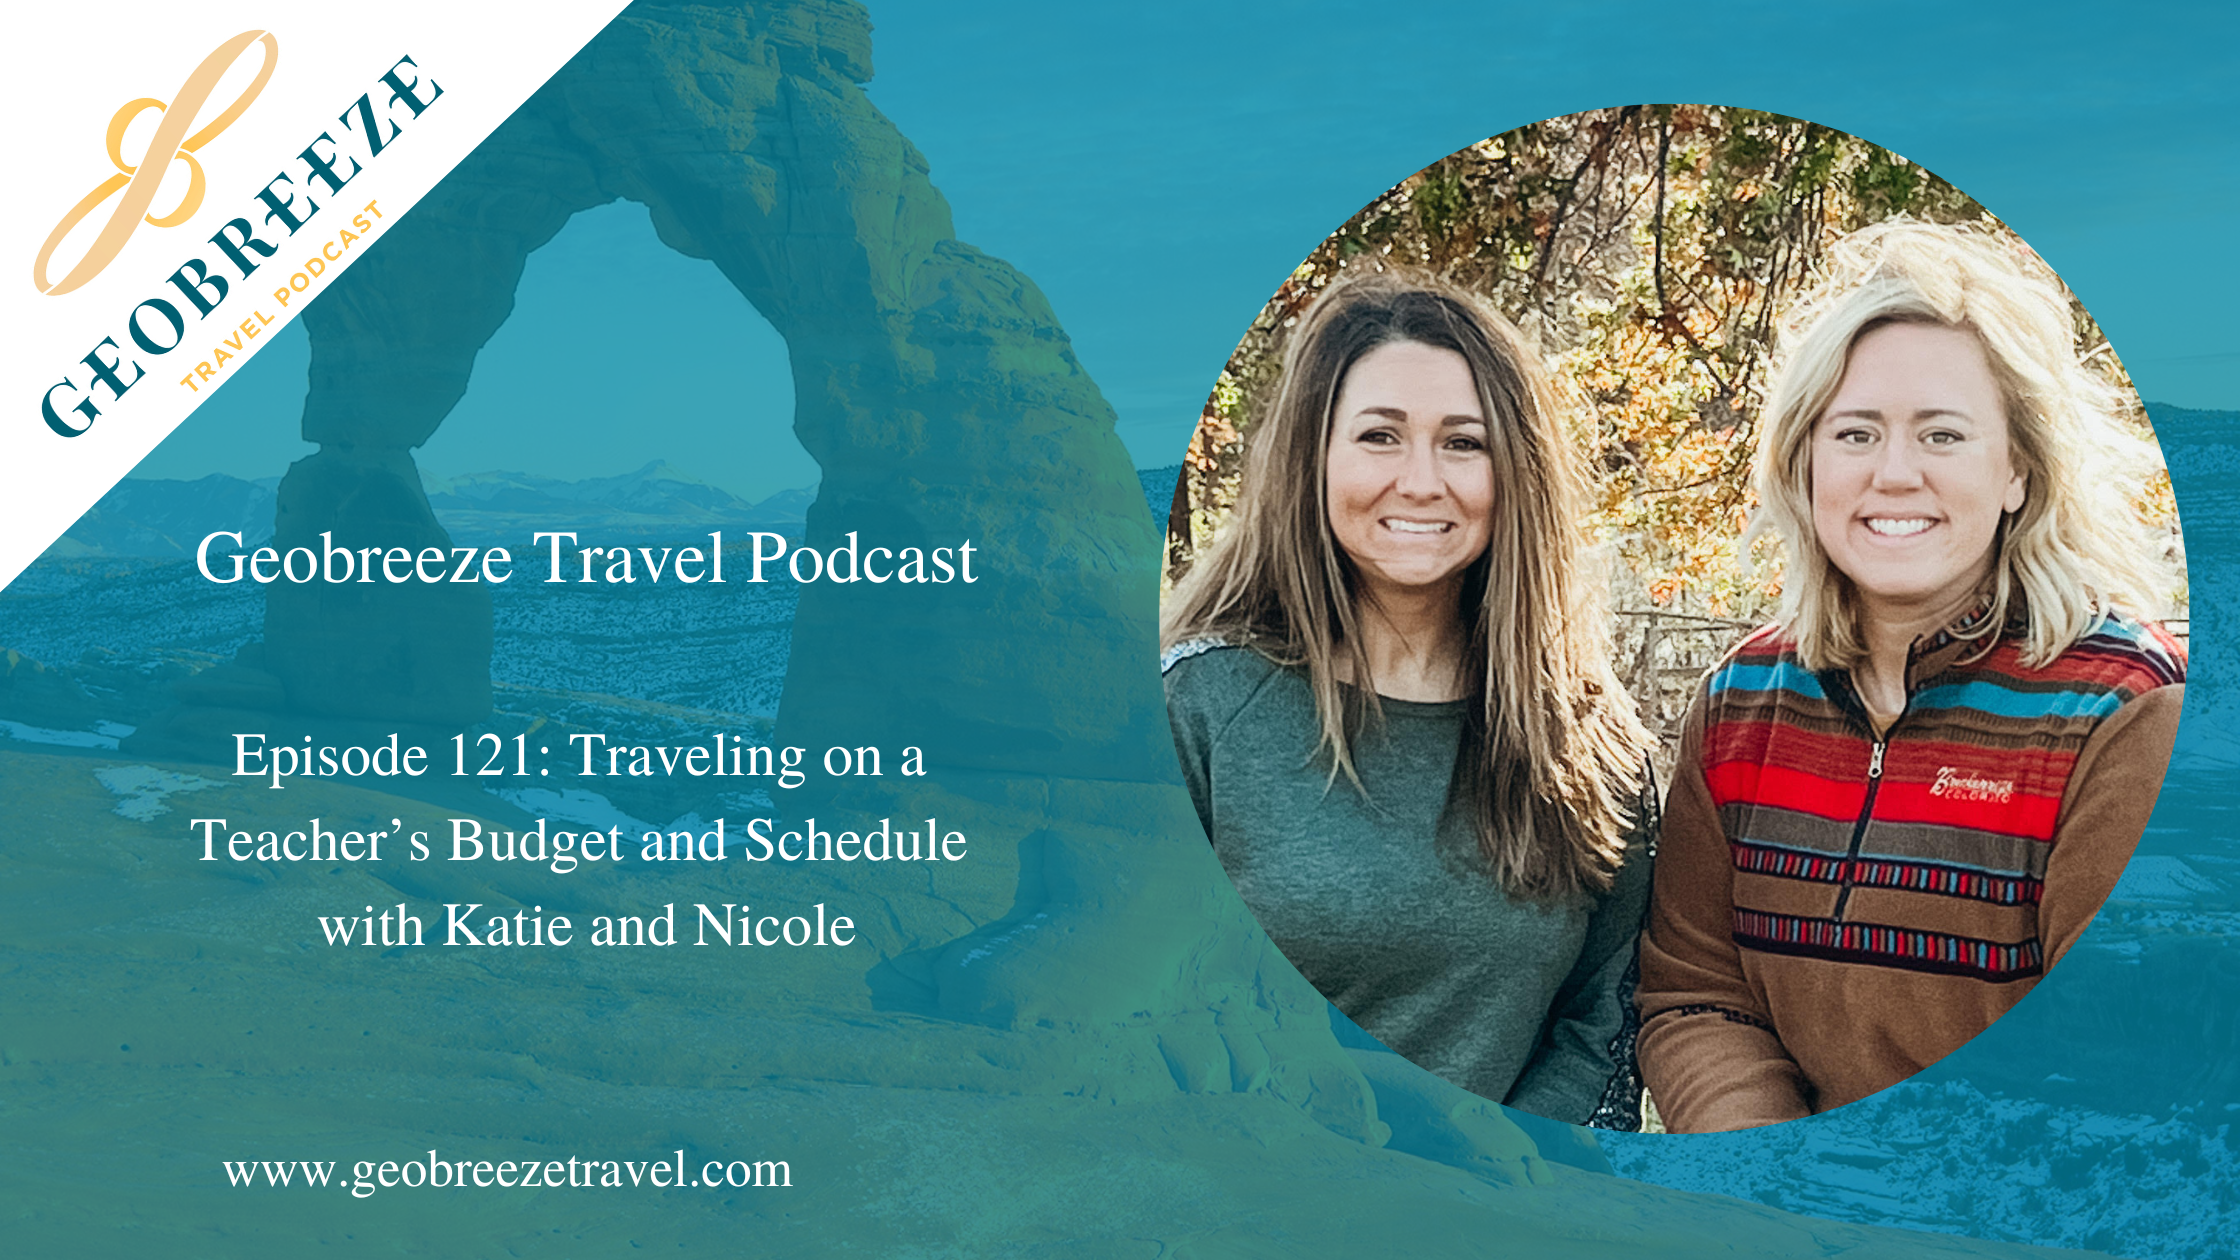 Episode 121: Traveling on a Teacher’s Budget and Schedule with Katie and Nicole